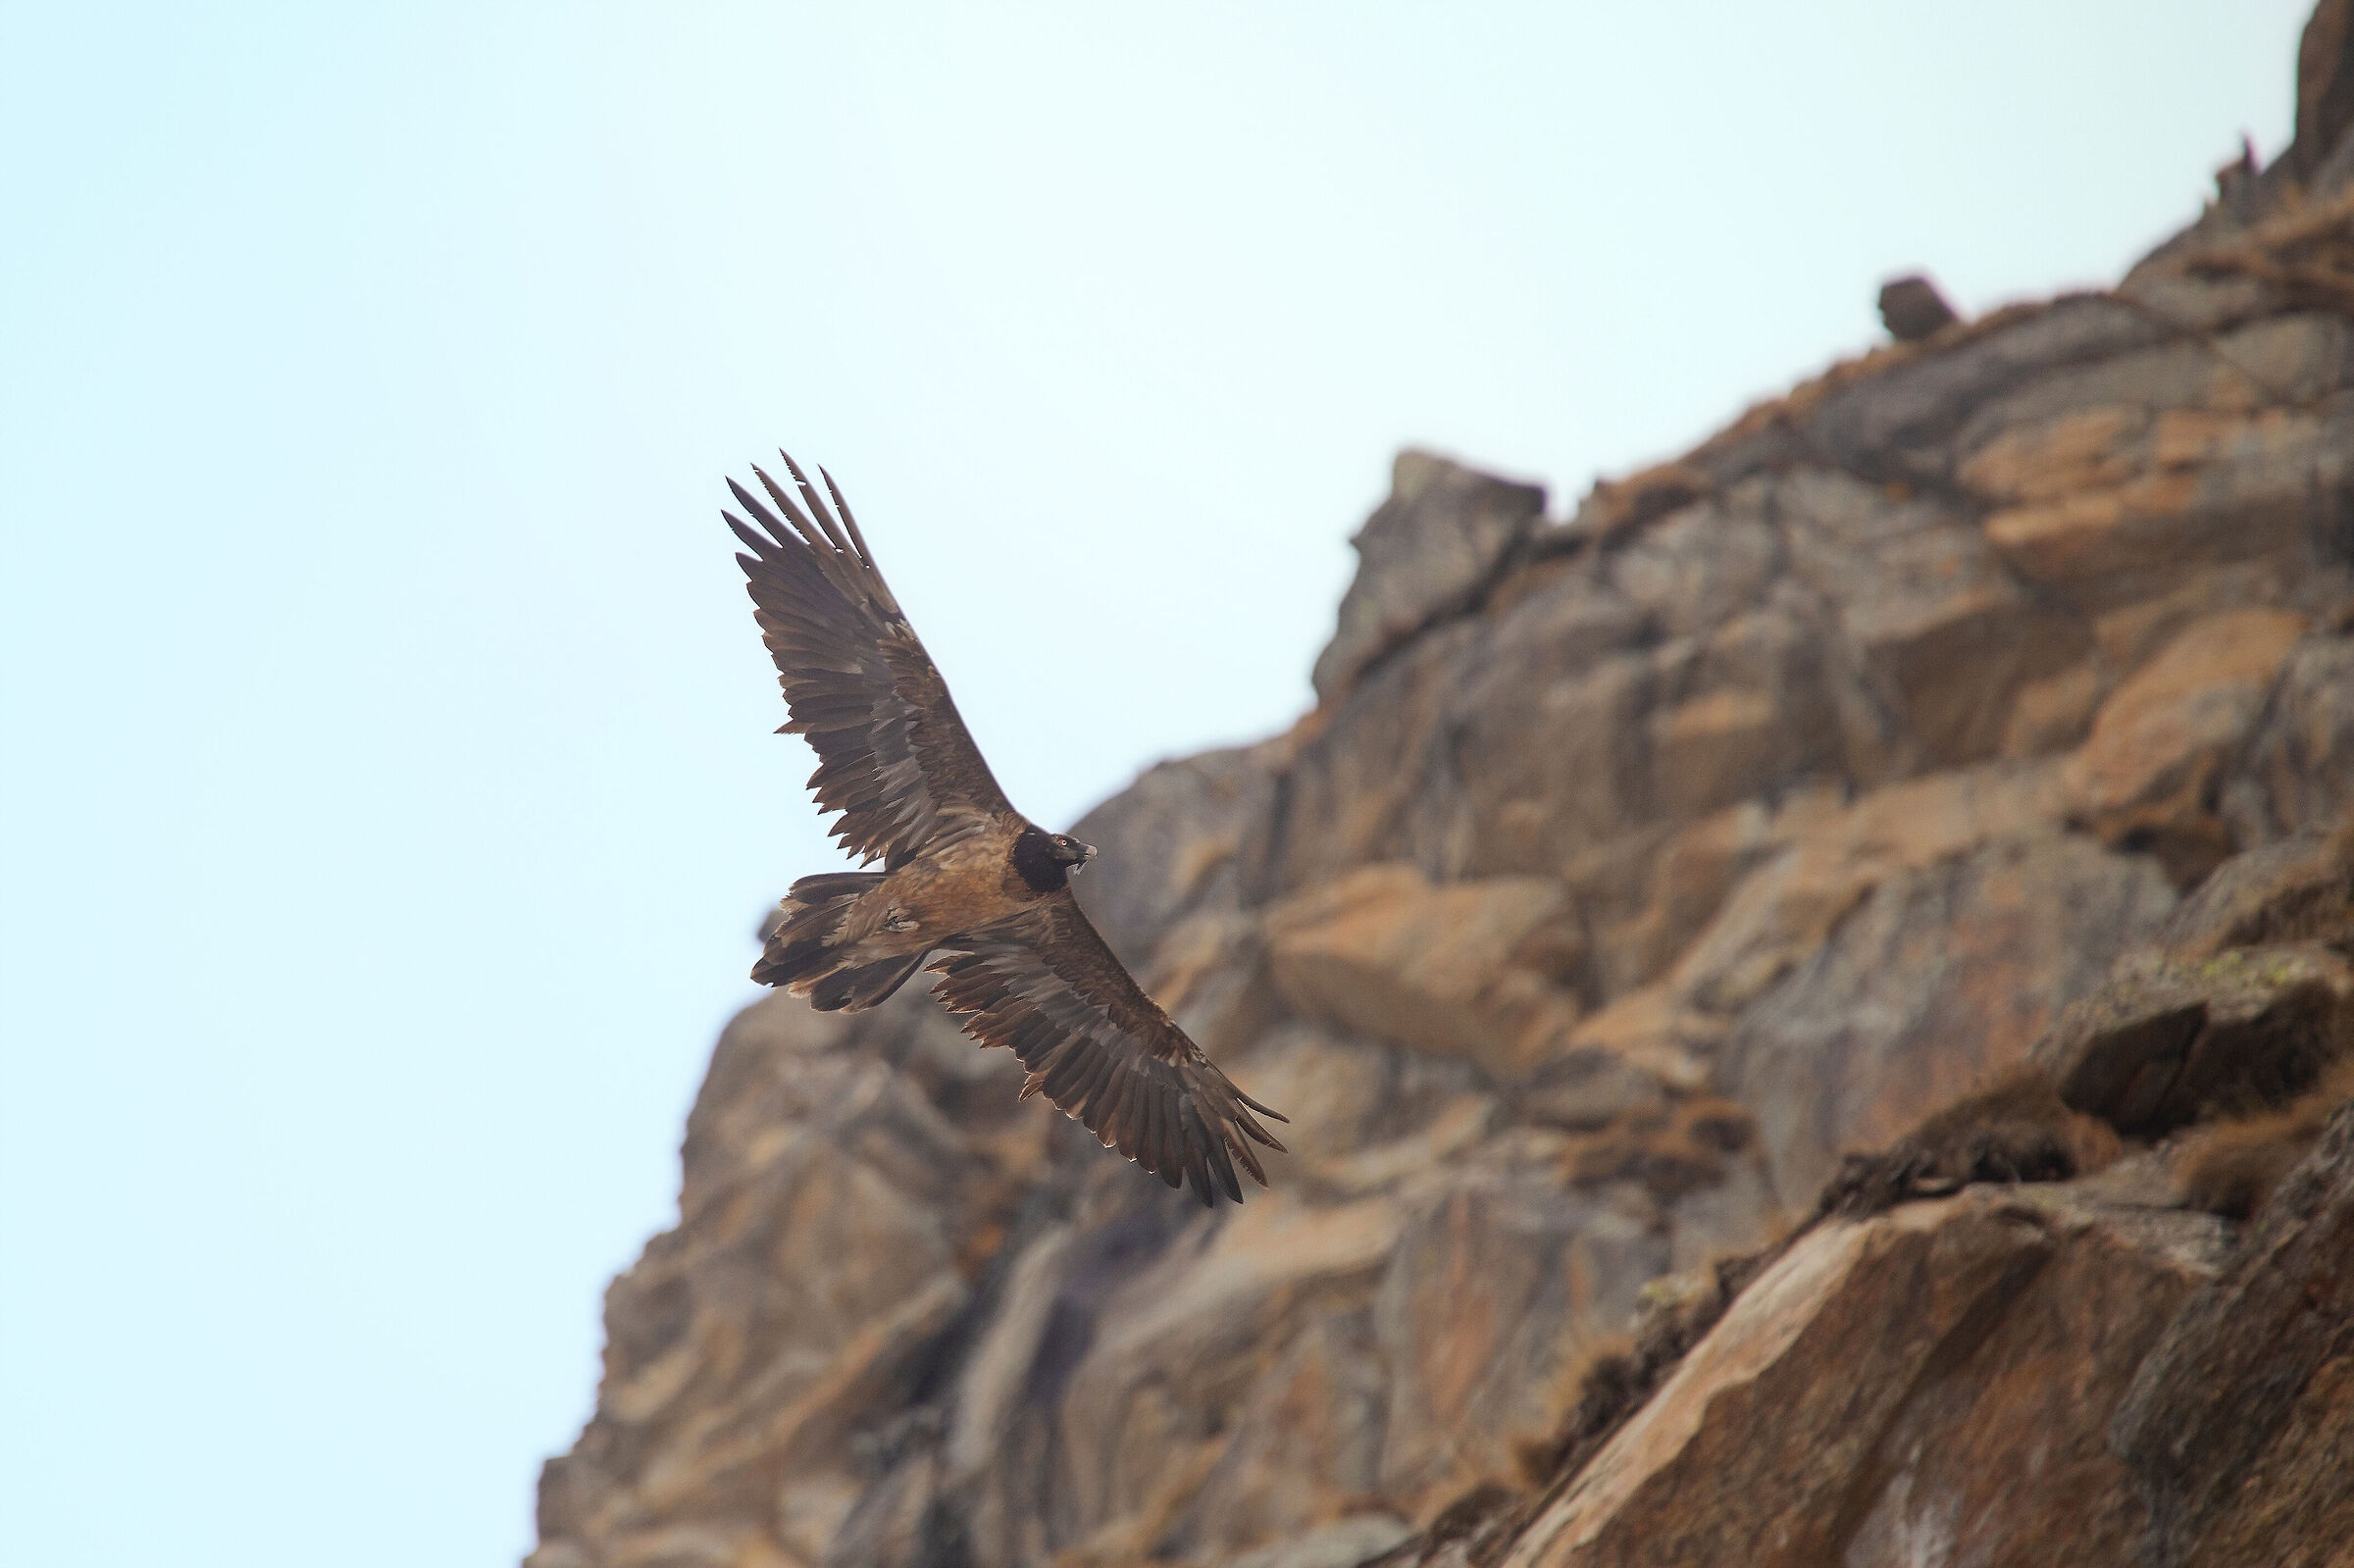 Bearded vulture camouflaged on the rocks...